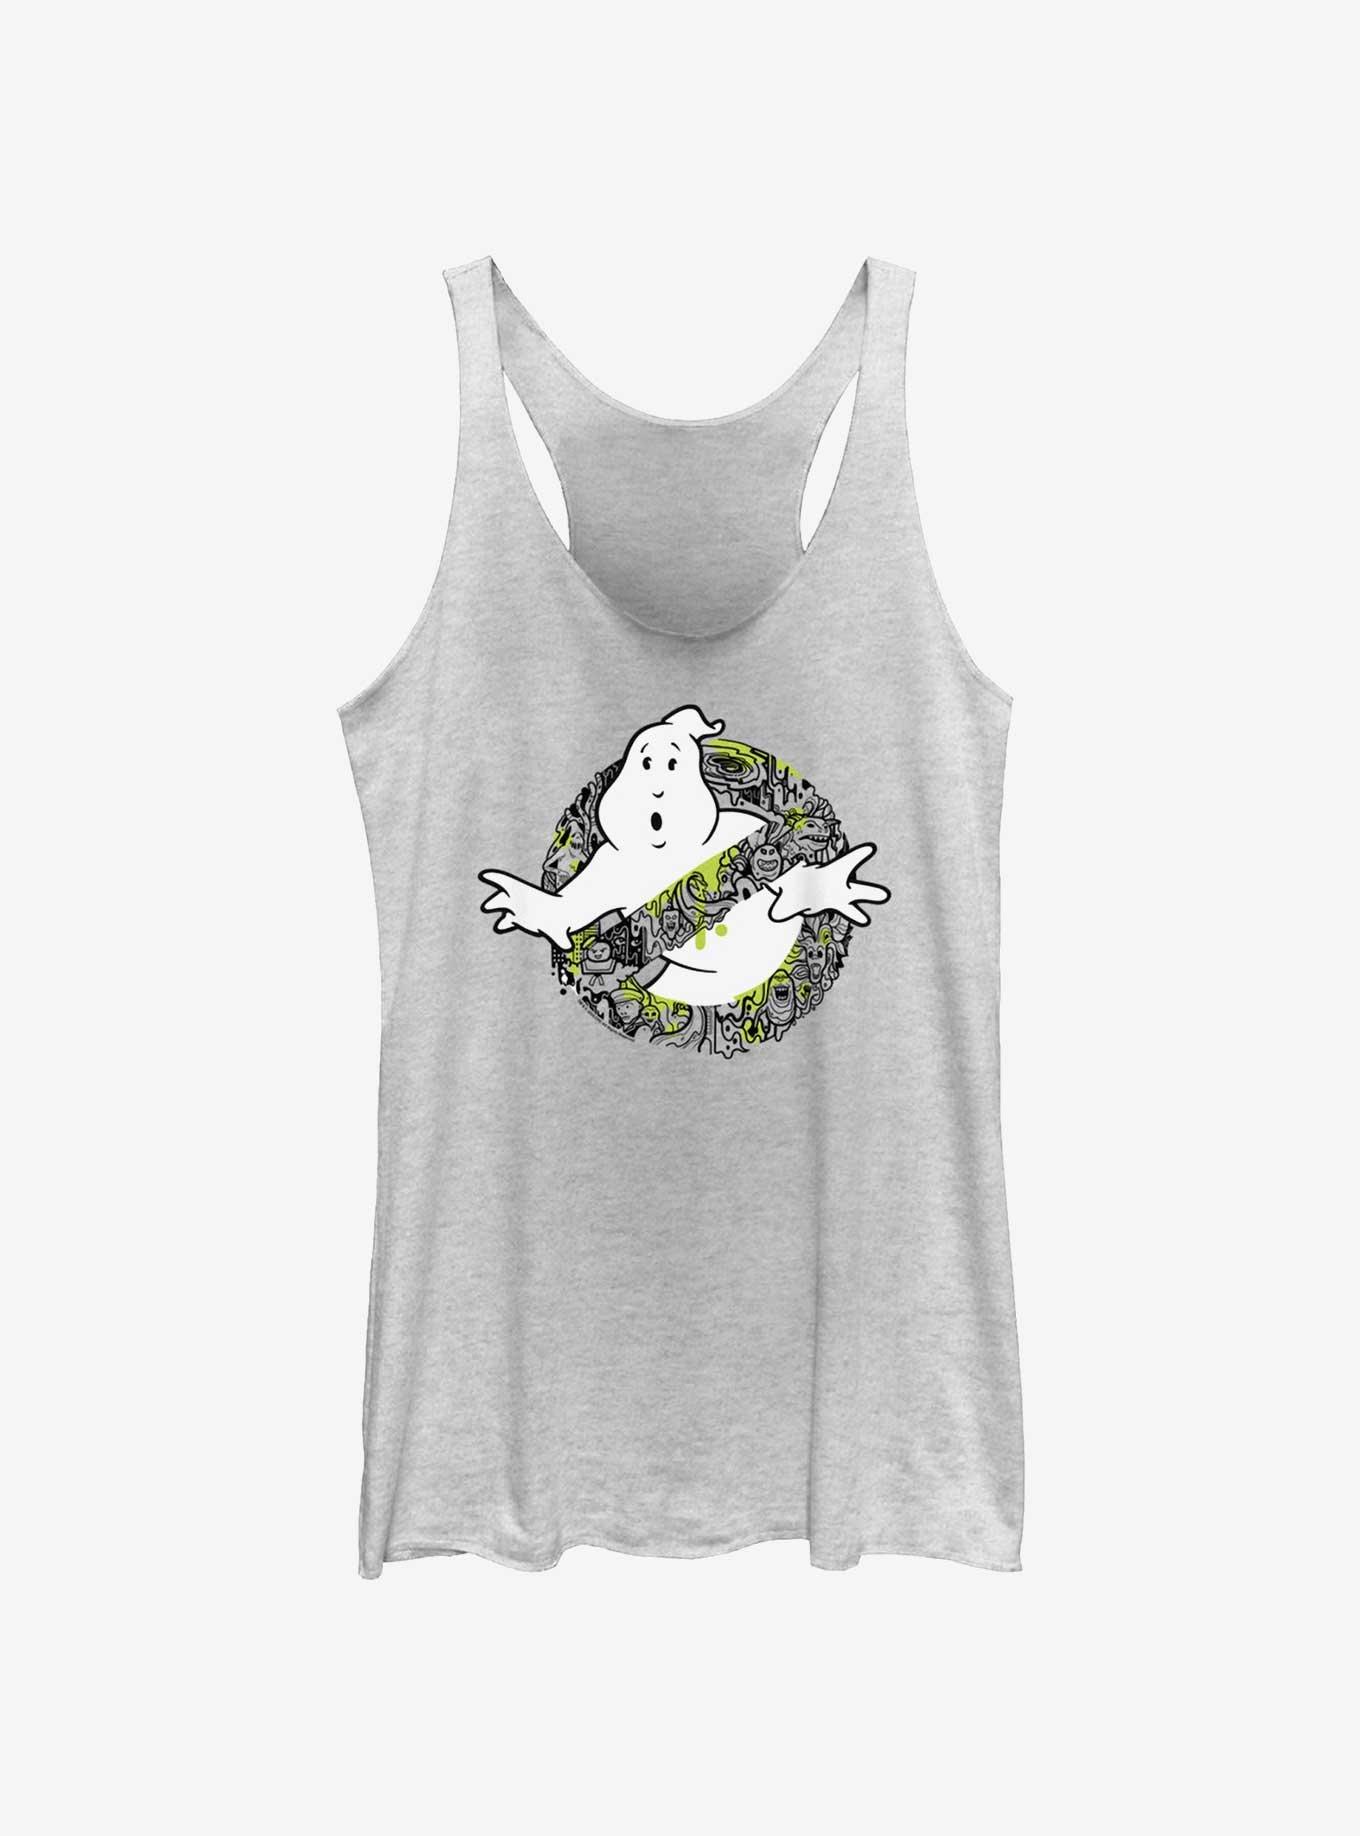 Ghostbusters: Frozen Empire Busting Ghosts Girls Tank, WHITE HTR, hi-res